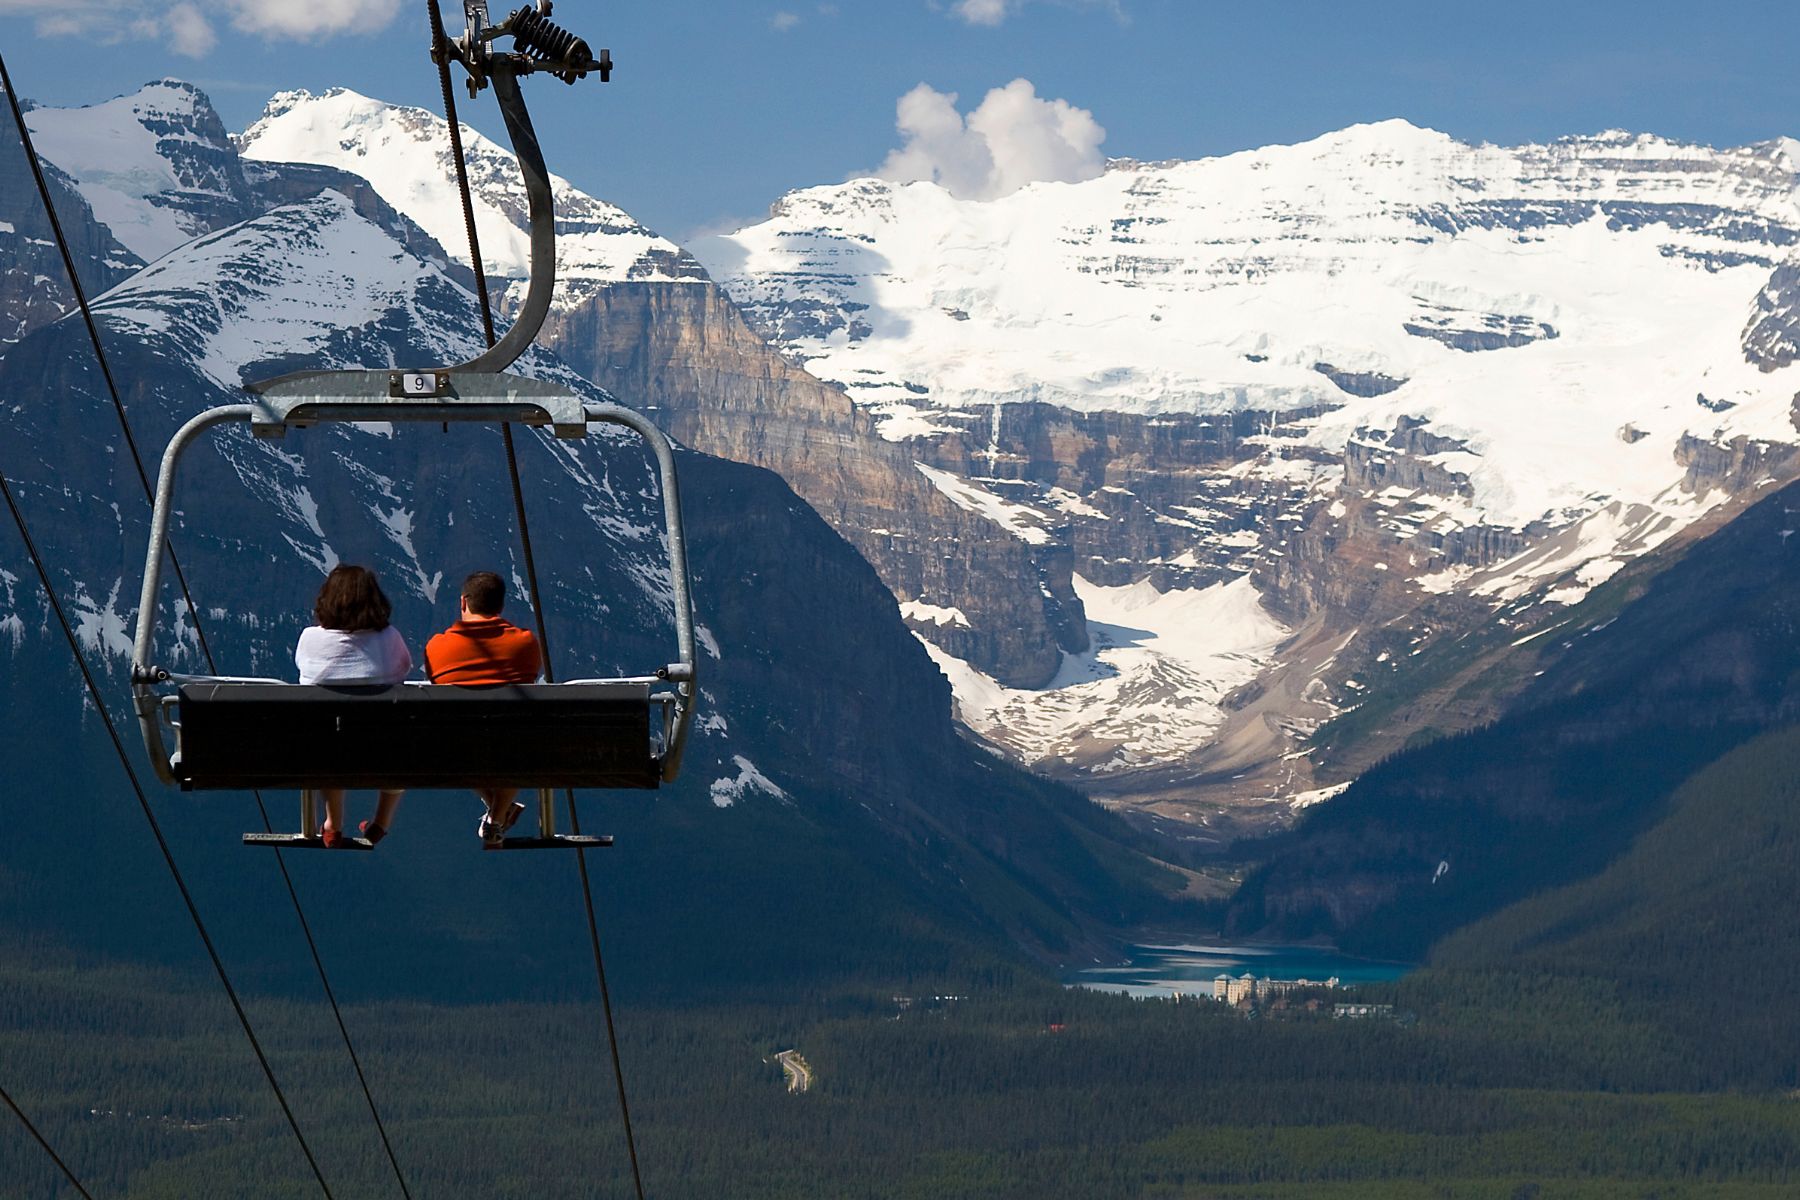 views of lake louise from the summer chairlift